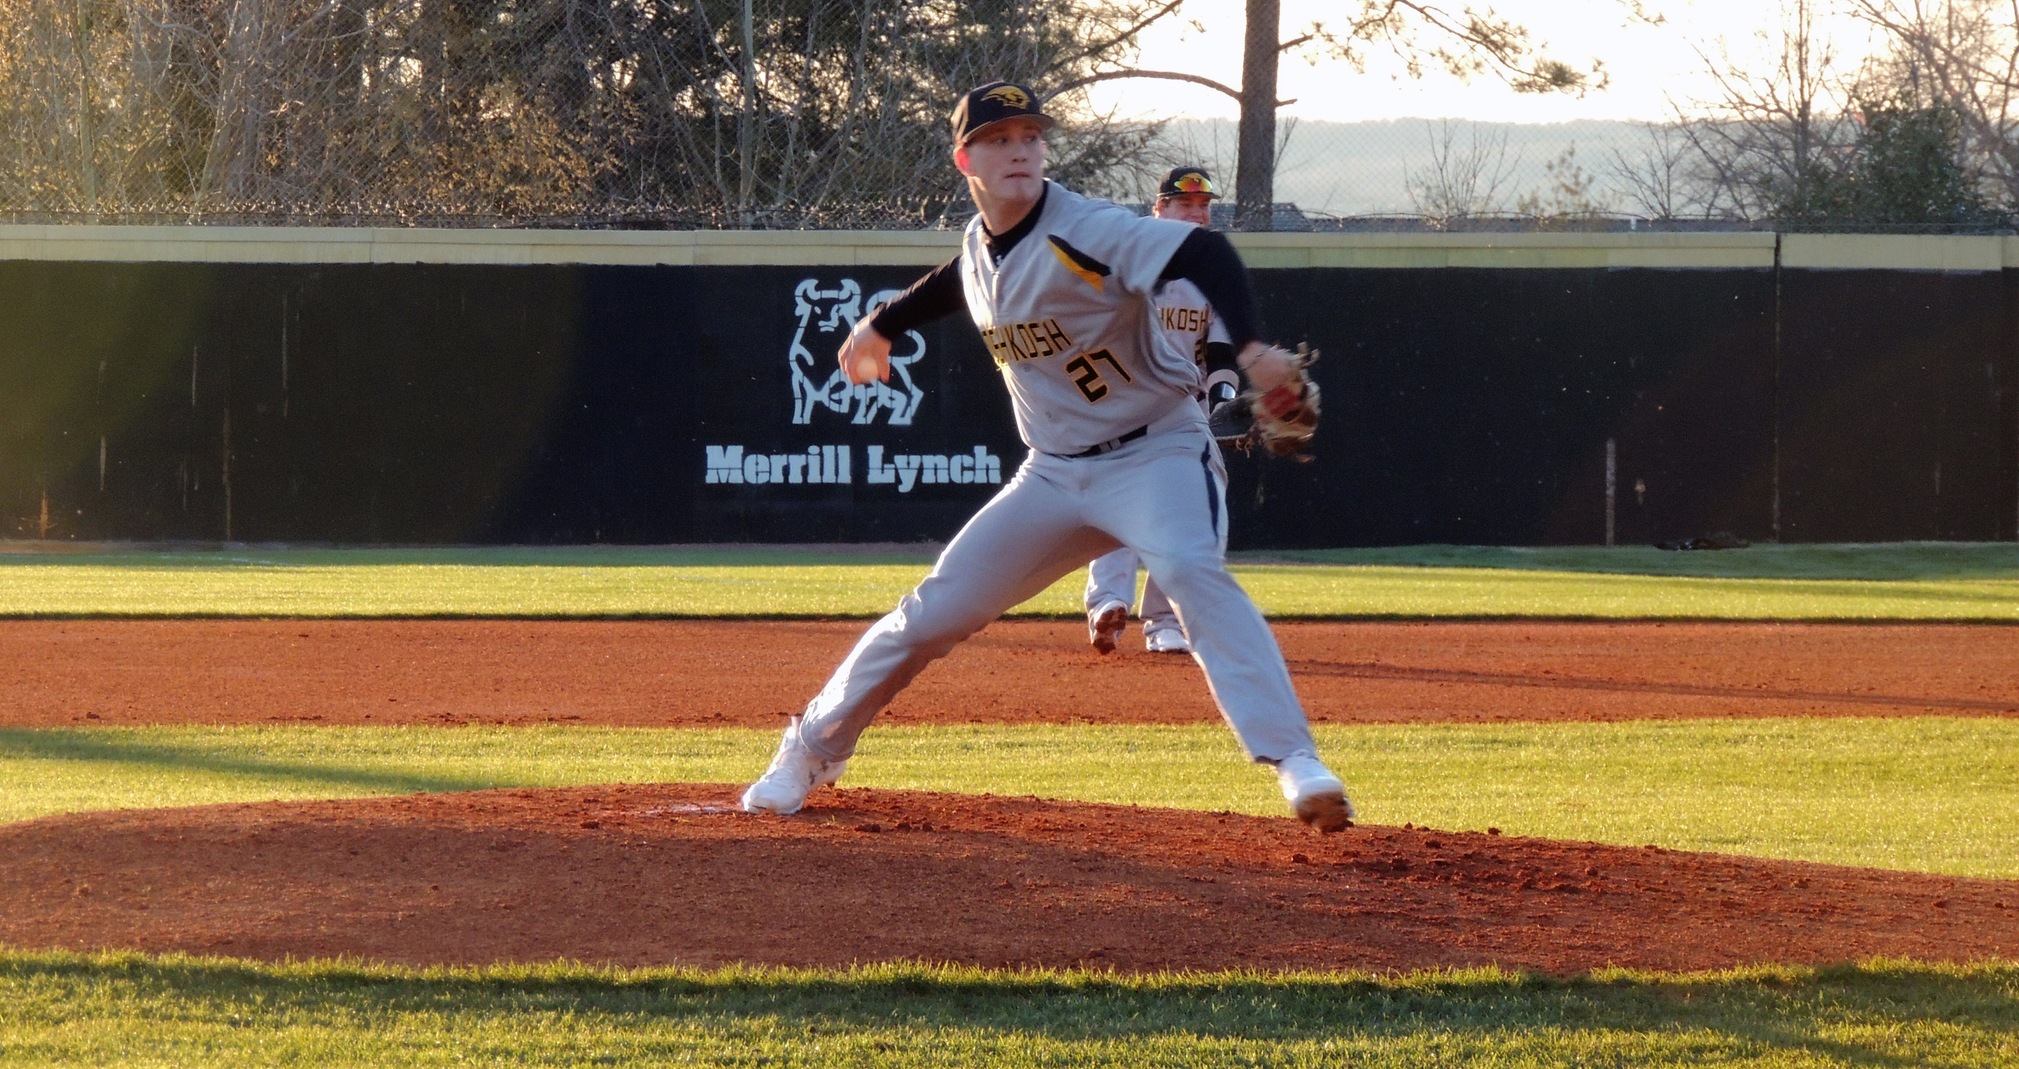 Colan Treml pitched five innings to earn the win. He struck out seven batters, including the first four of the game.